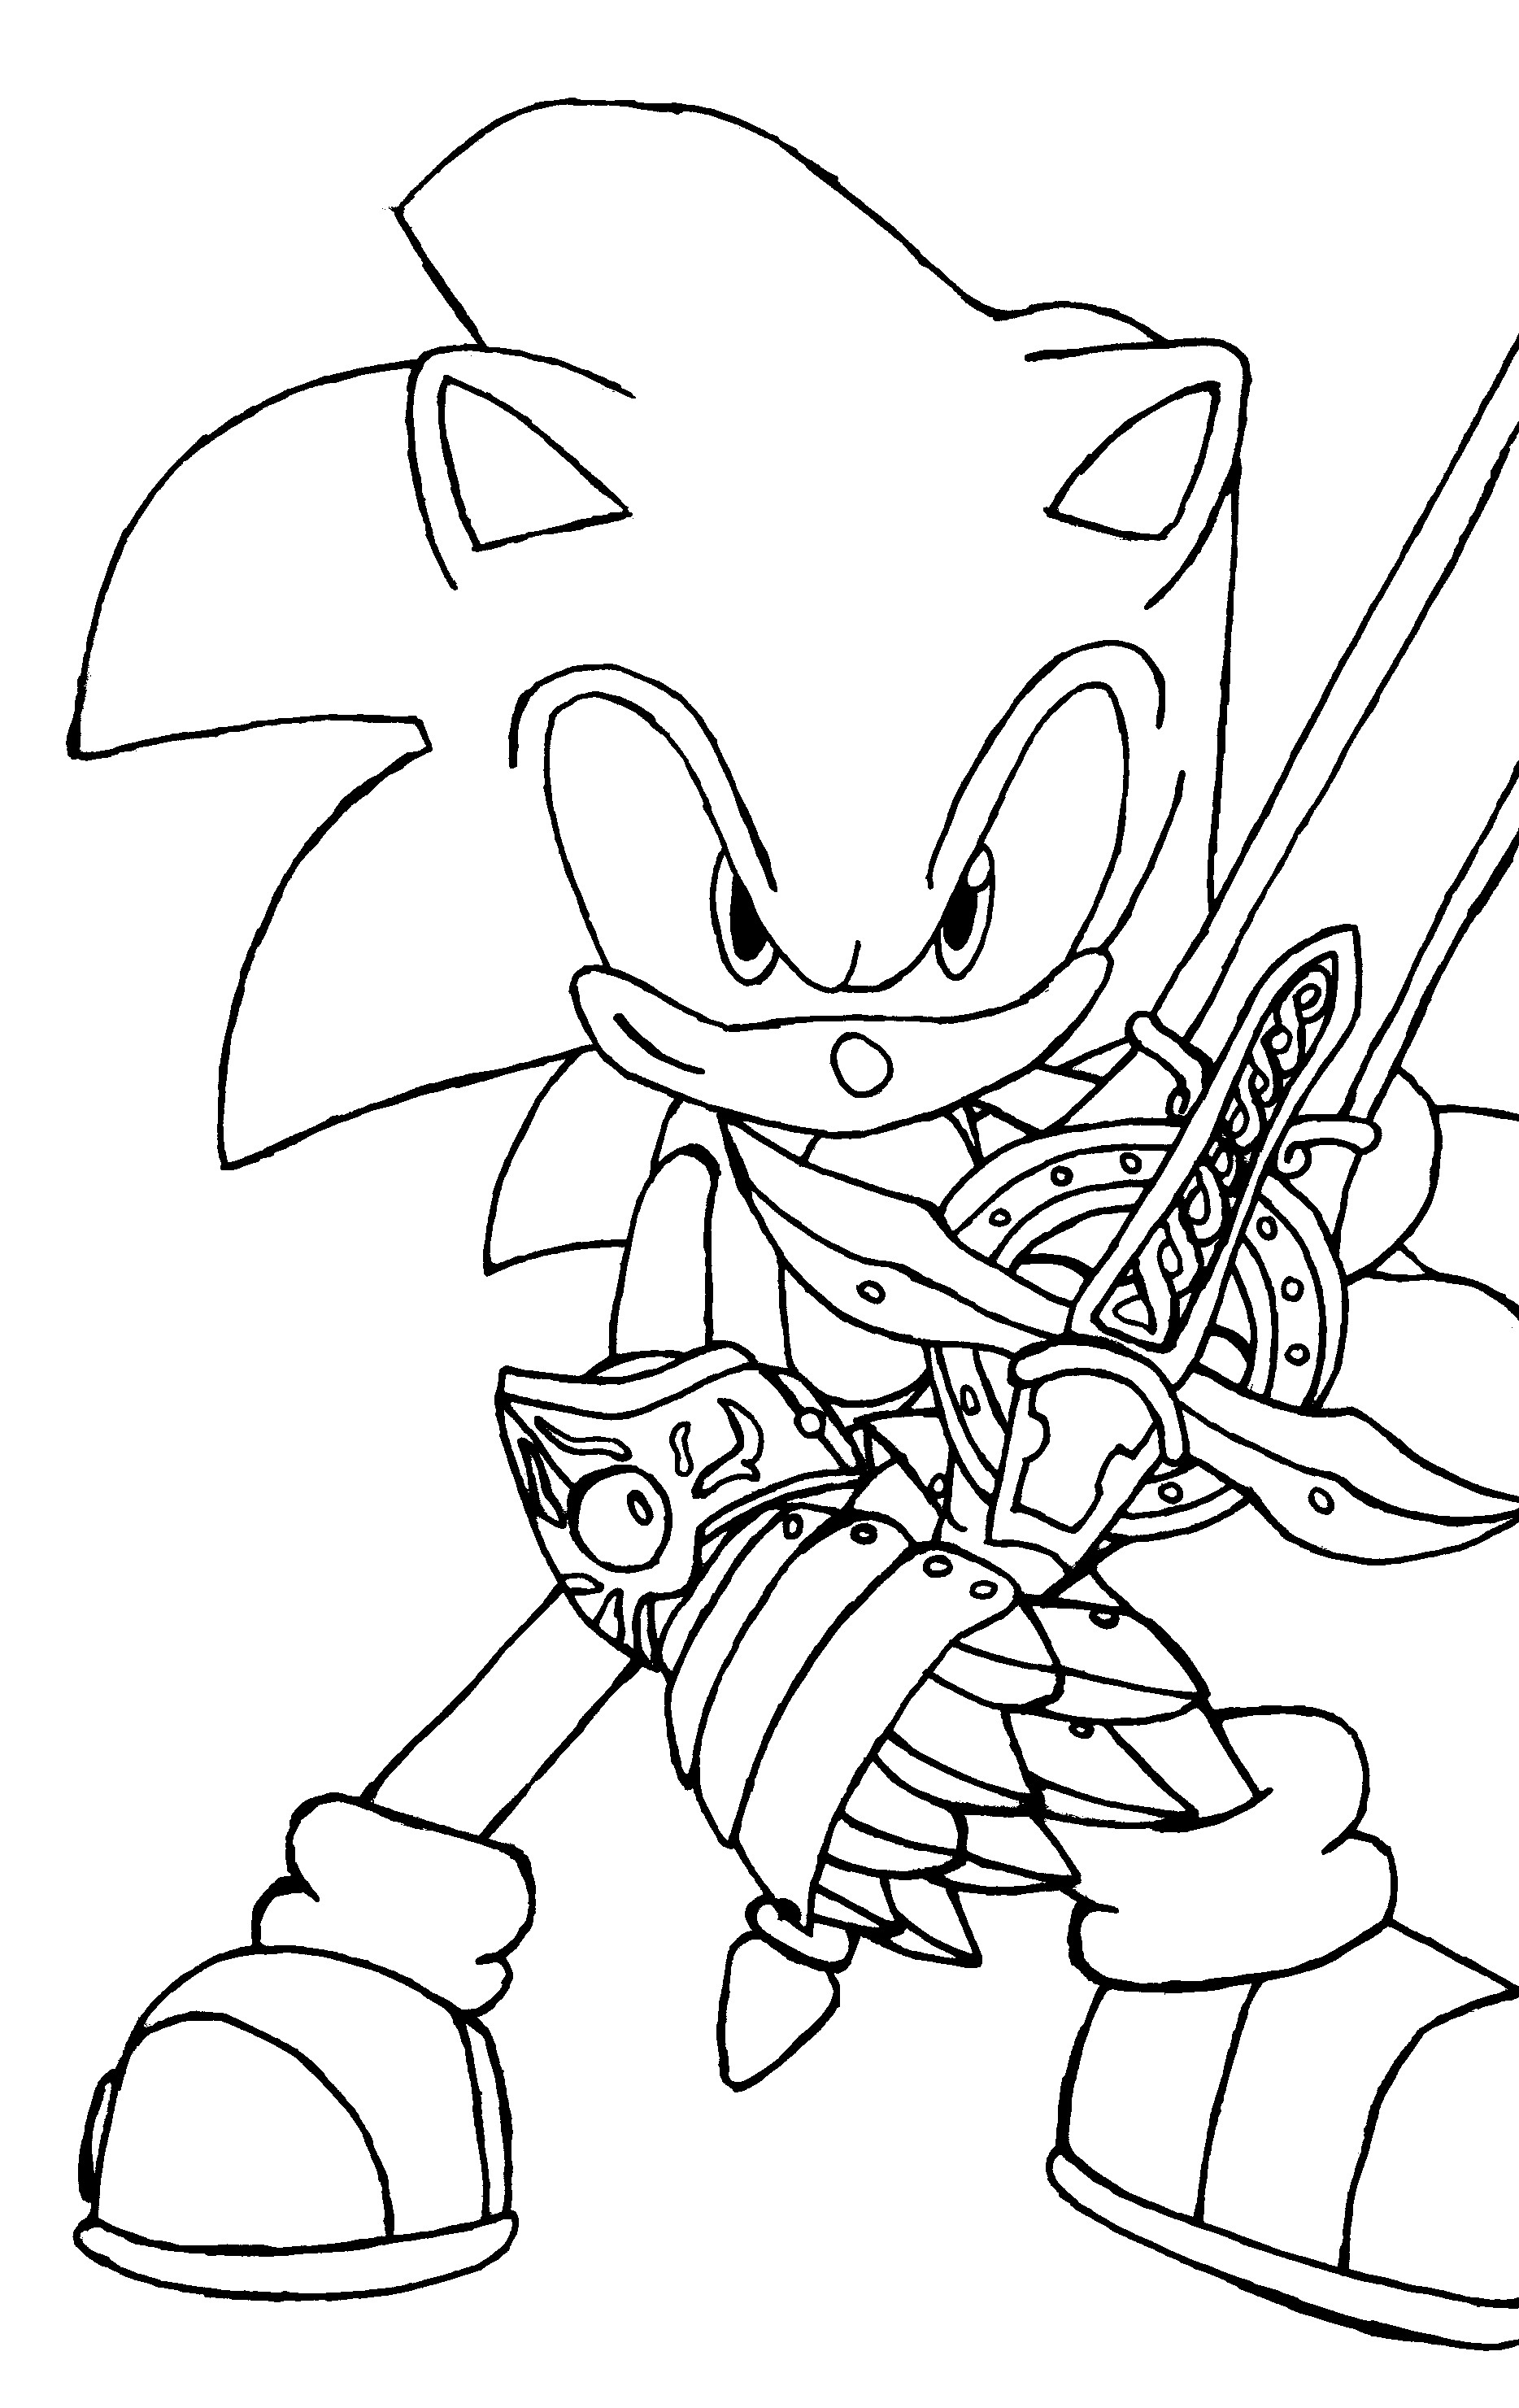 Print Pictures Of Sonic | Sonic The Hedgehog Coloring Pages Free - Sonic Coloring Pages Free Printable